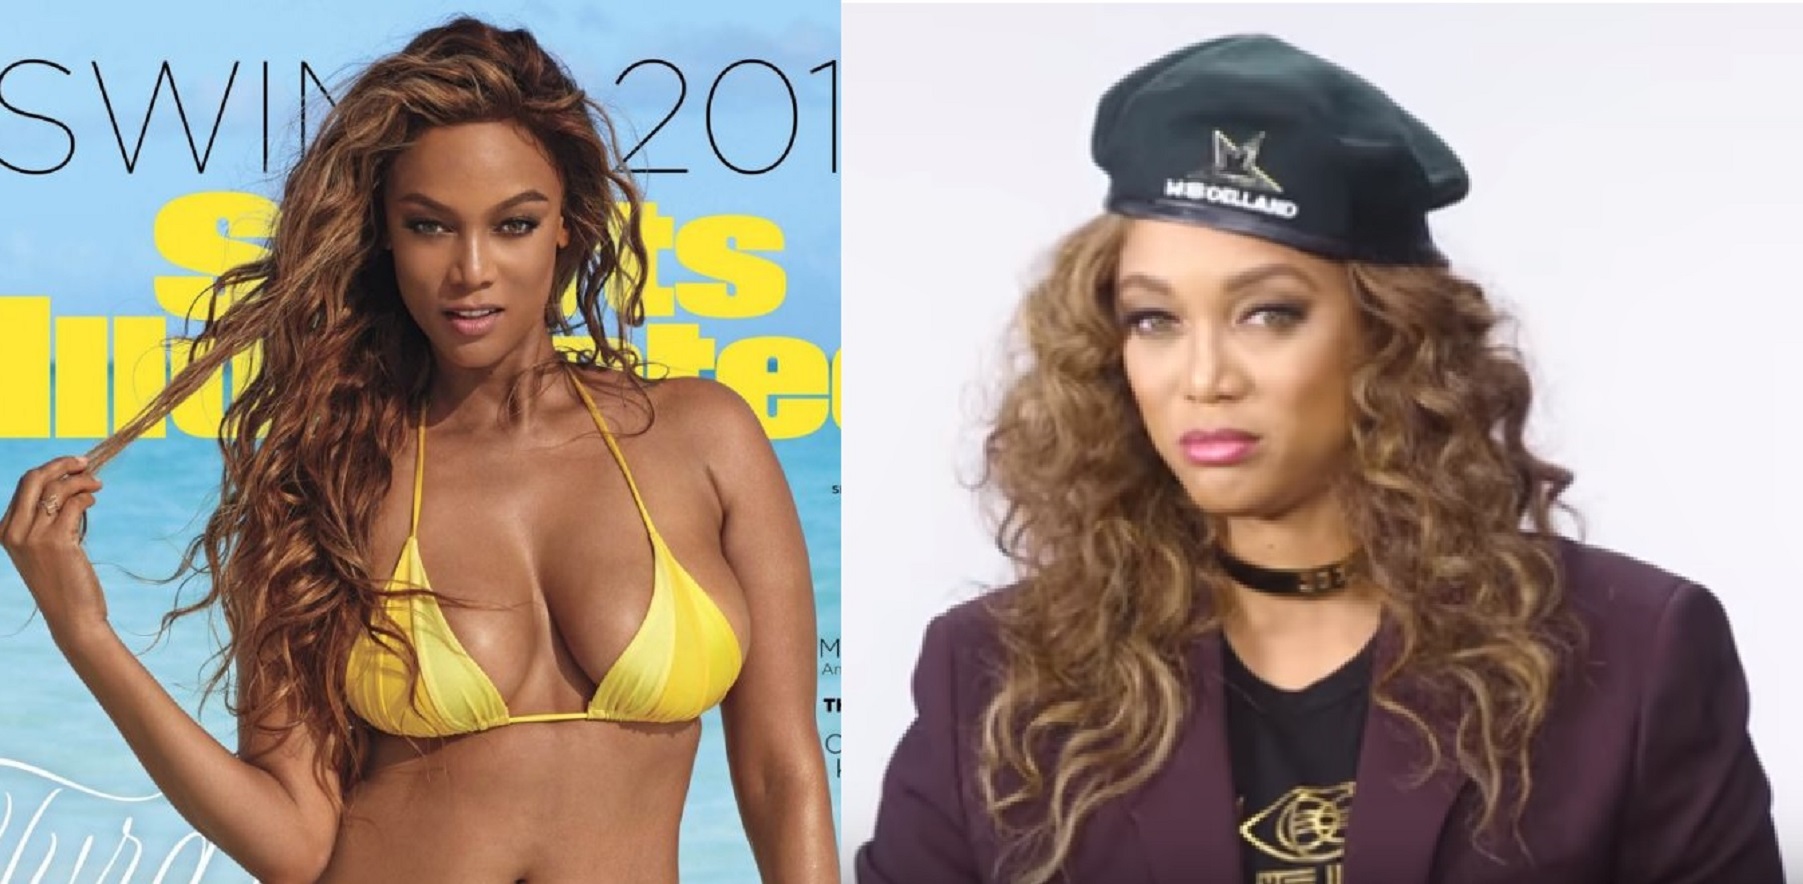 Tyra Banks Gained 30 Lbs Since That Famous 2019 Sports Illustrated Cover